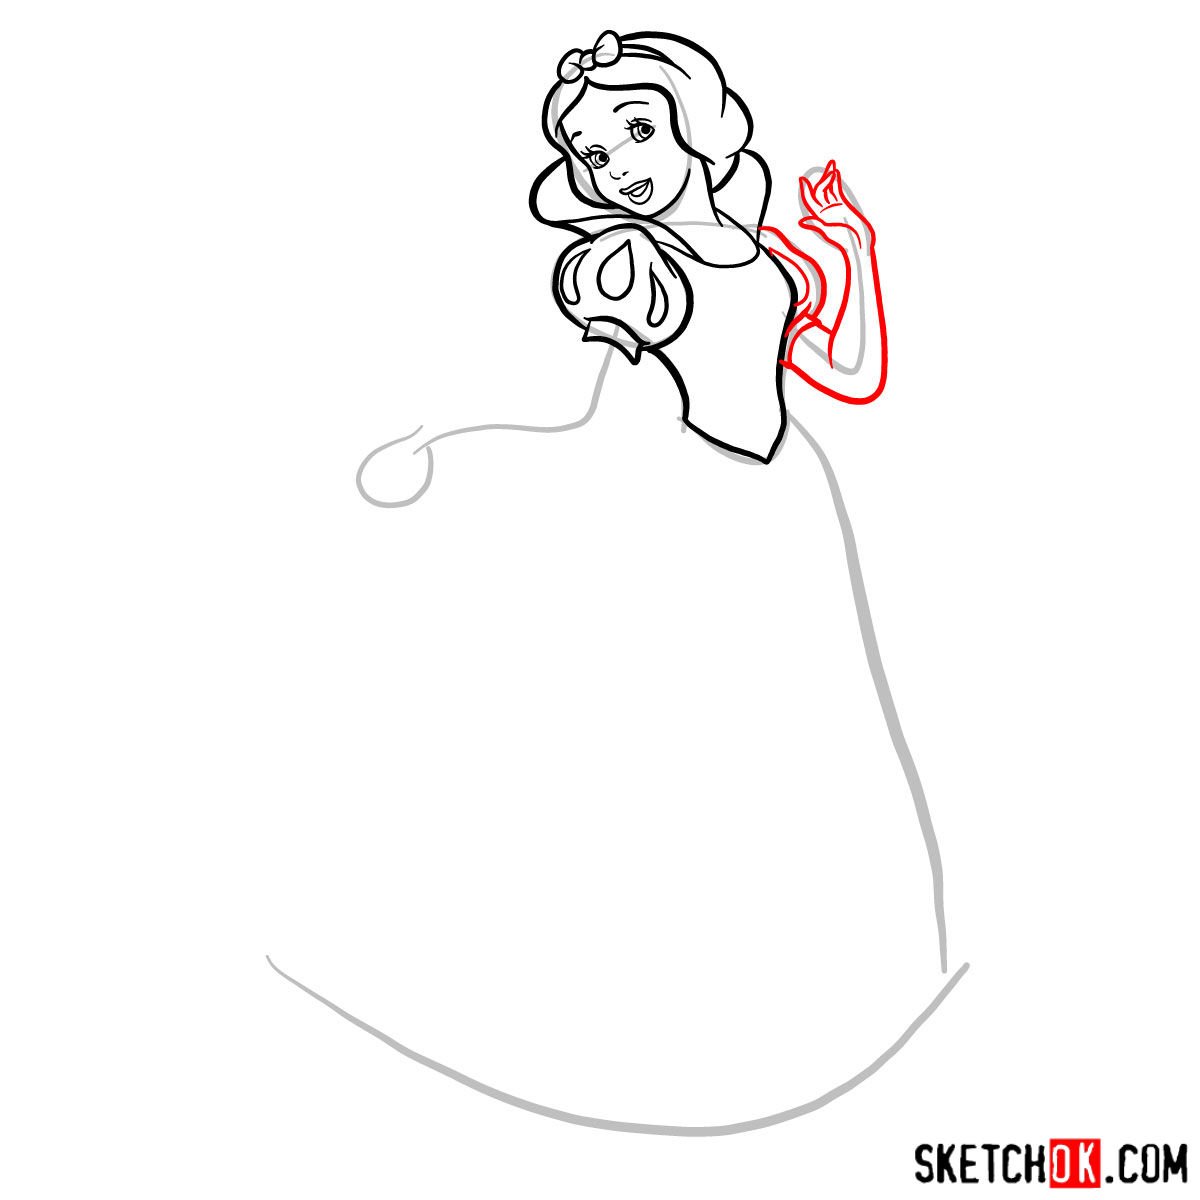 How to draw Snow White - step 08